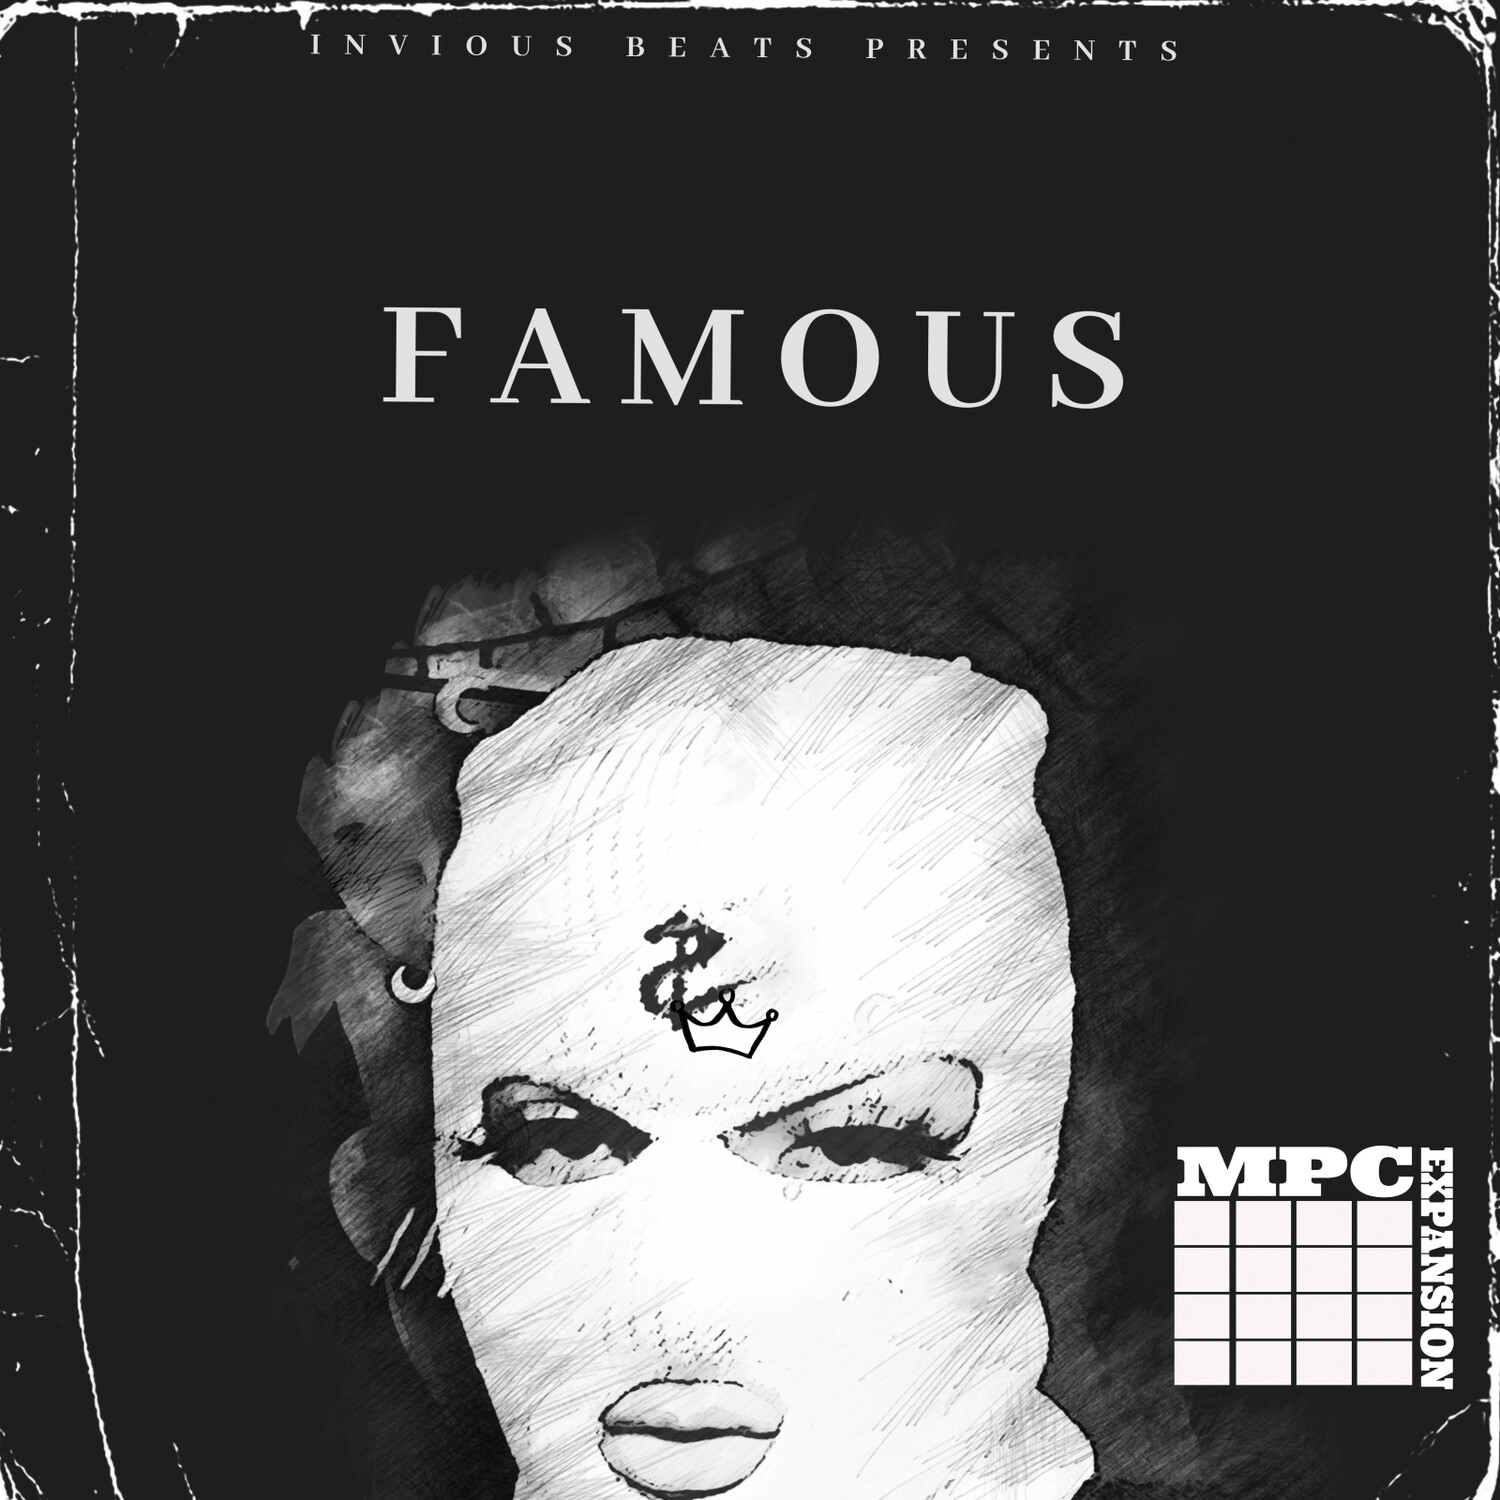 MPC EXPANSION "FAMOUS" by INVIOUS